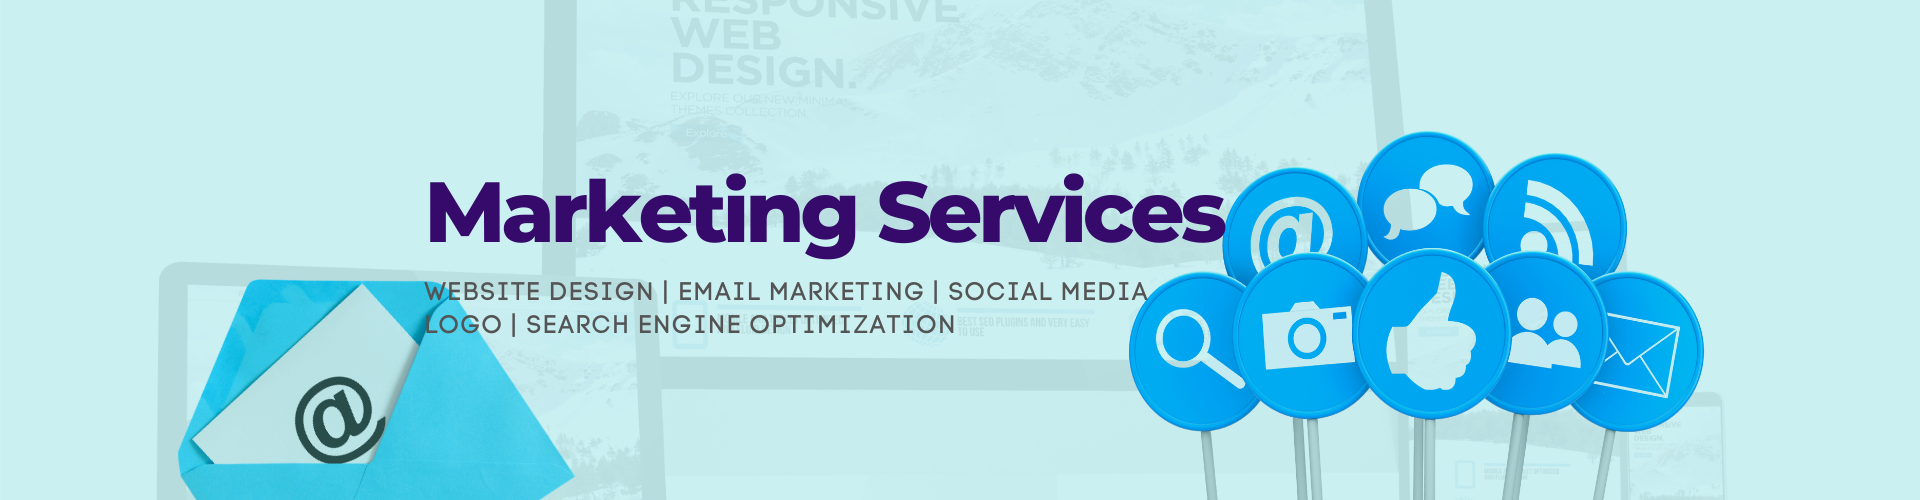 Marketing Services in Baton Rouge